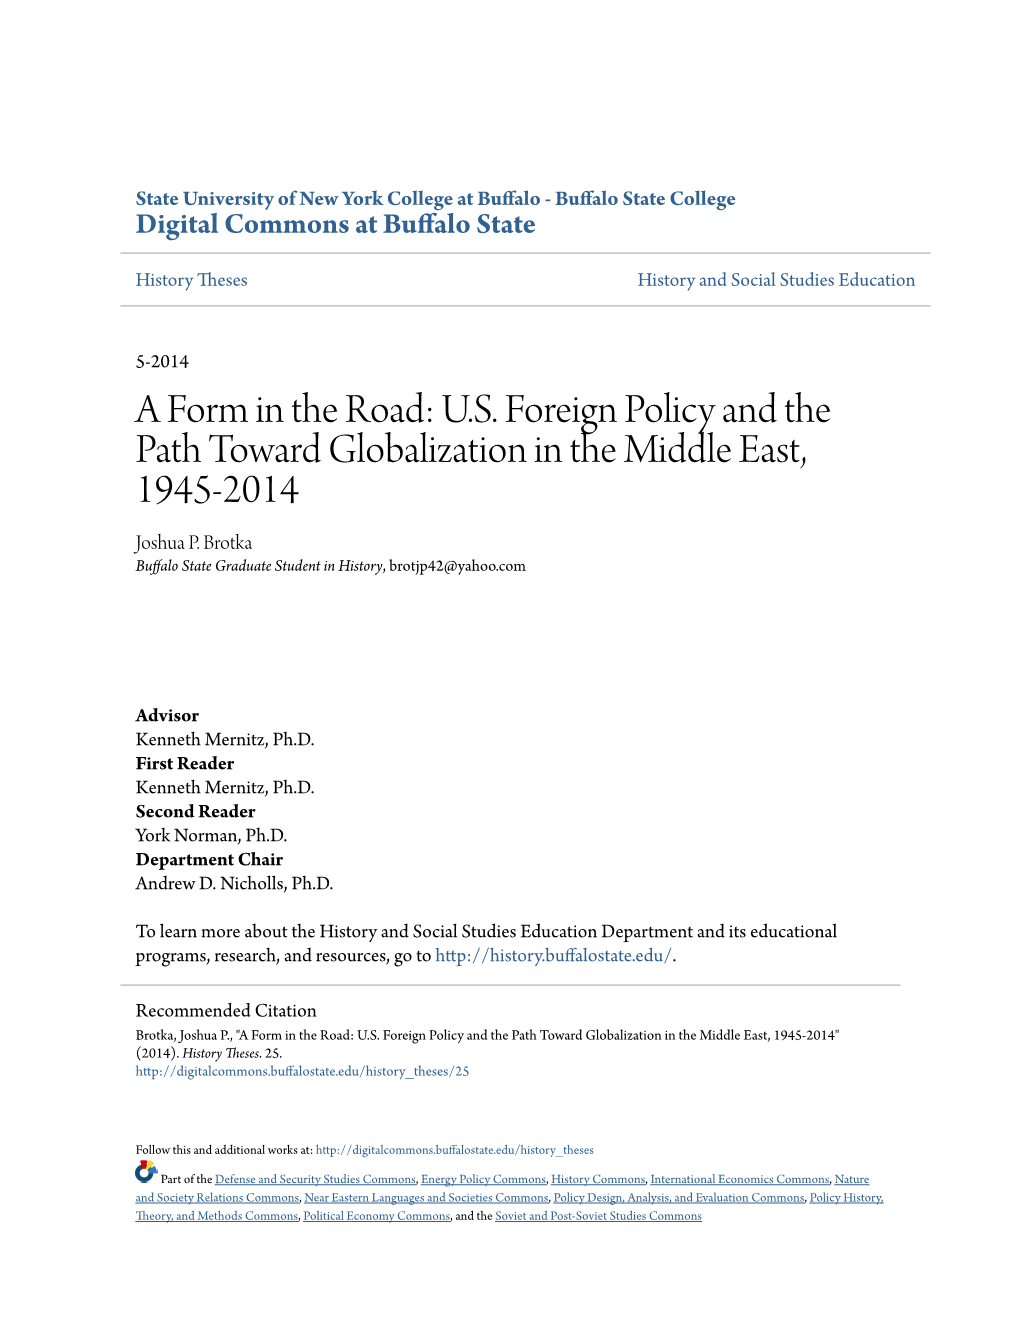 A Form in the Road: U.S. Foreign Policy and the Path Toward Globalization in the Middle East, 1945-2014 Joshua P